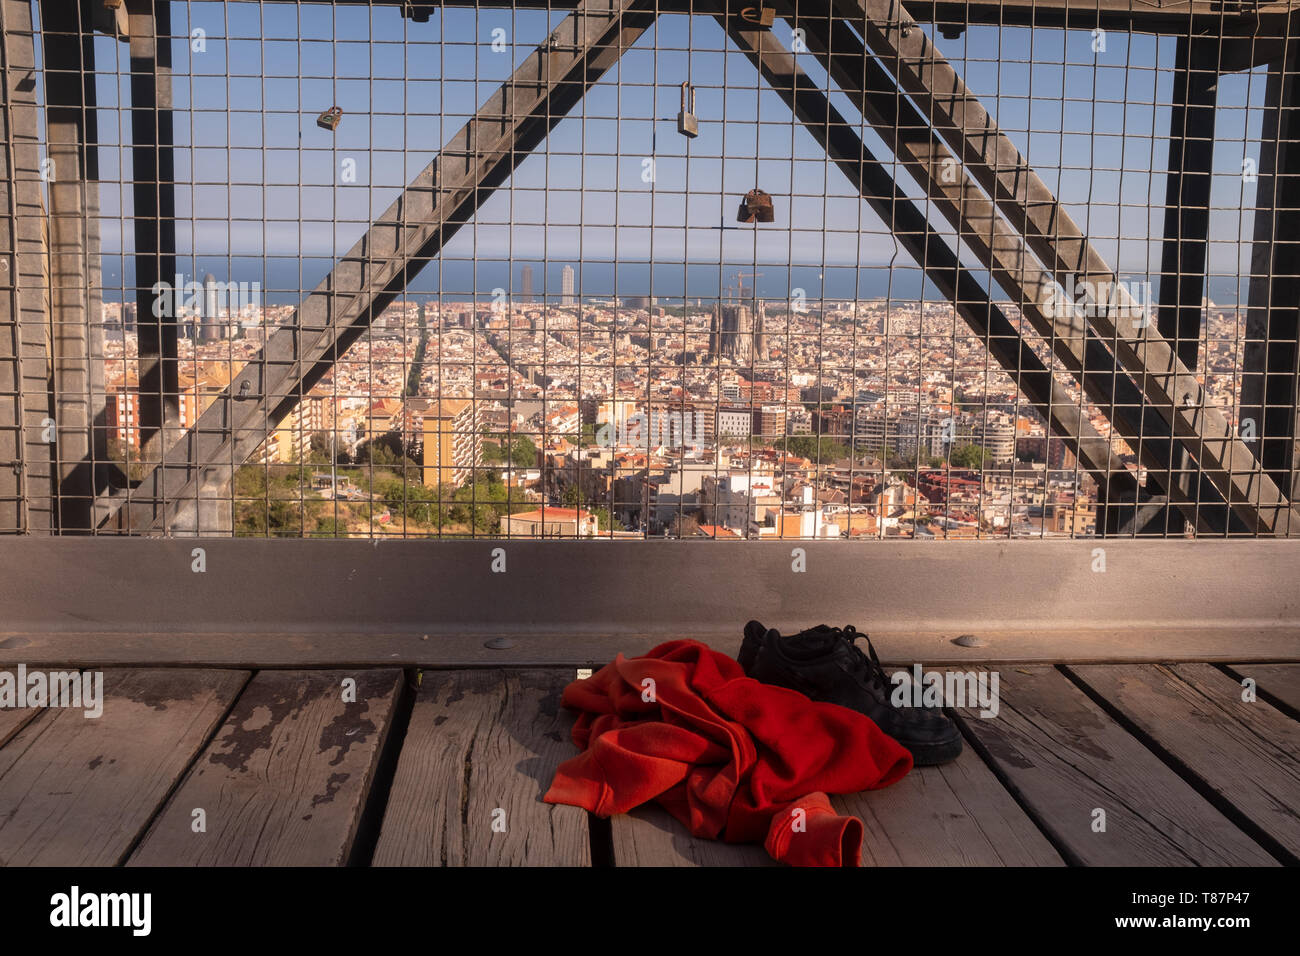 Sweatshirt and shoes of a girl who could have committed suicide by jumping off a bridge, concept stop teenage suicide, the city of Barcelona in the ba Stock Photo